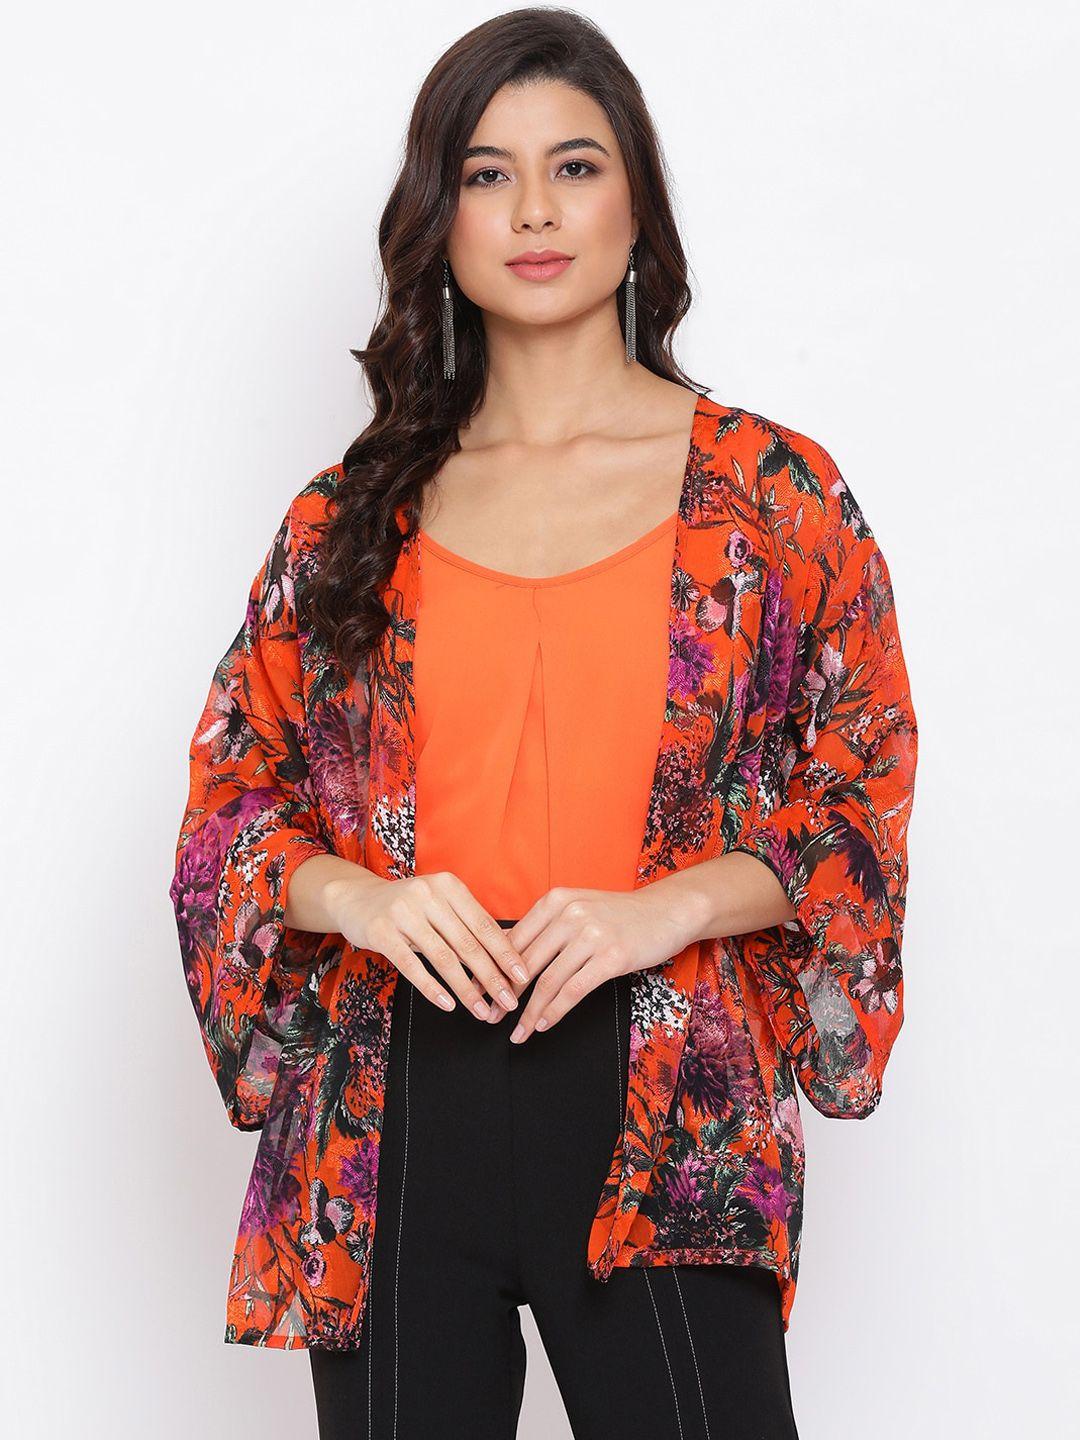 oxolloxo women orange & black floral printed open-front shrug with camisole